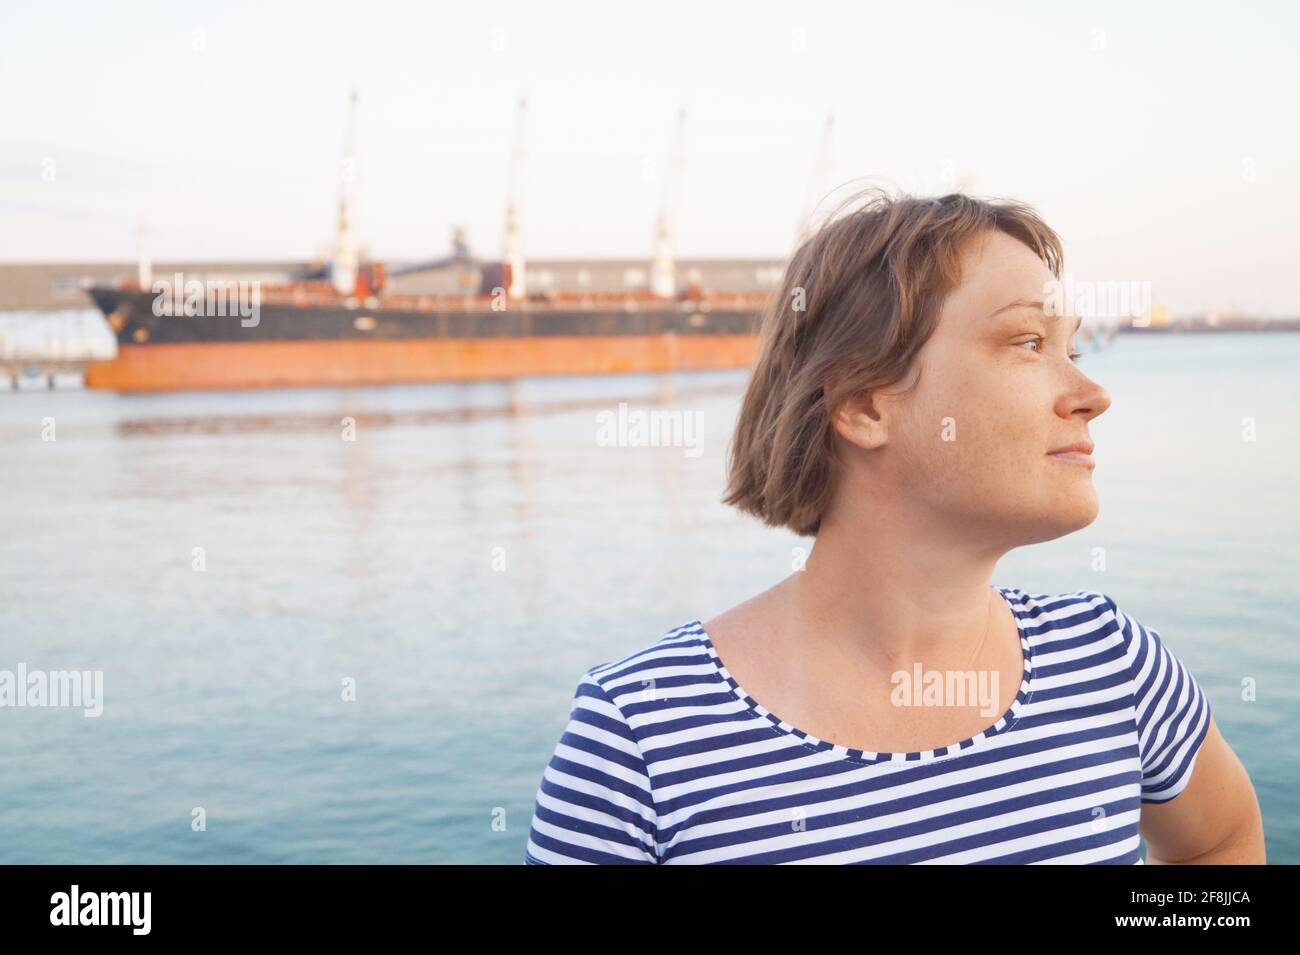 A woman looks to the side against the background of the ship Stock Photo